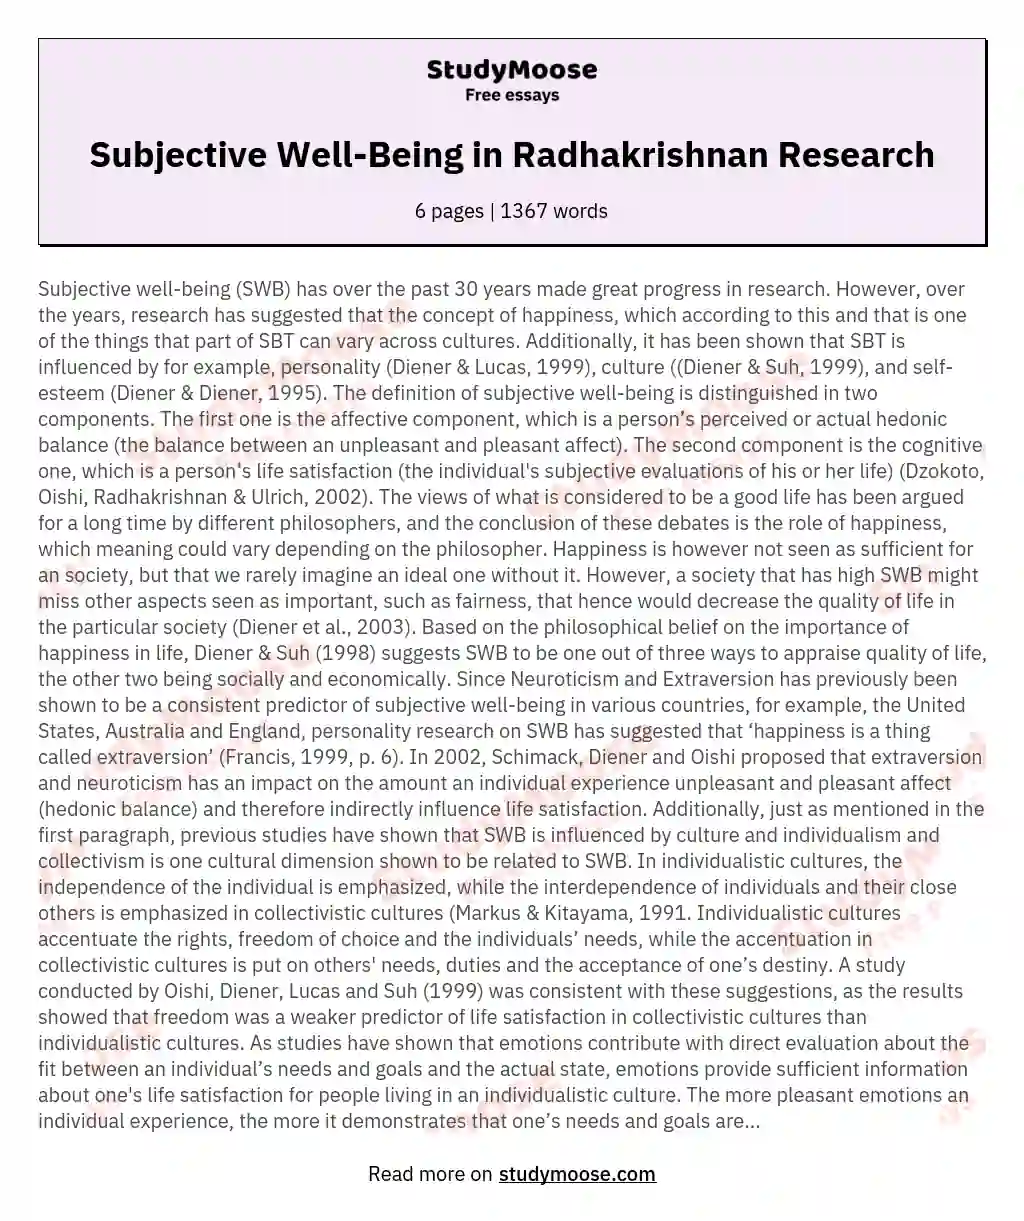 Subjective Well-Being in Radhakrishnan Research essay